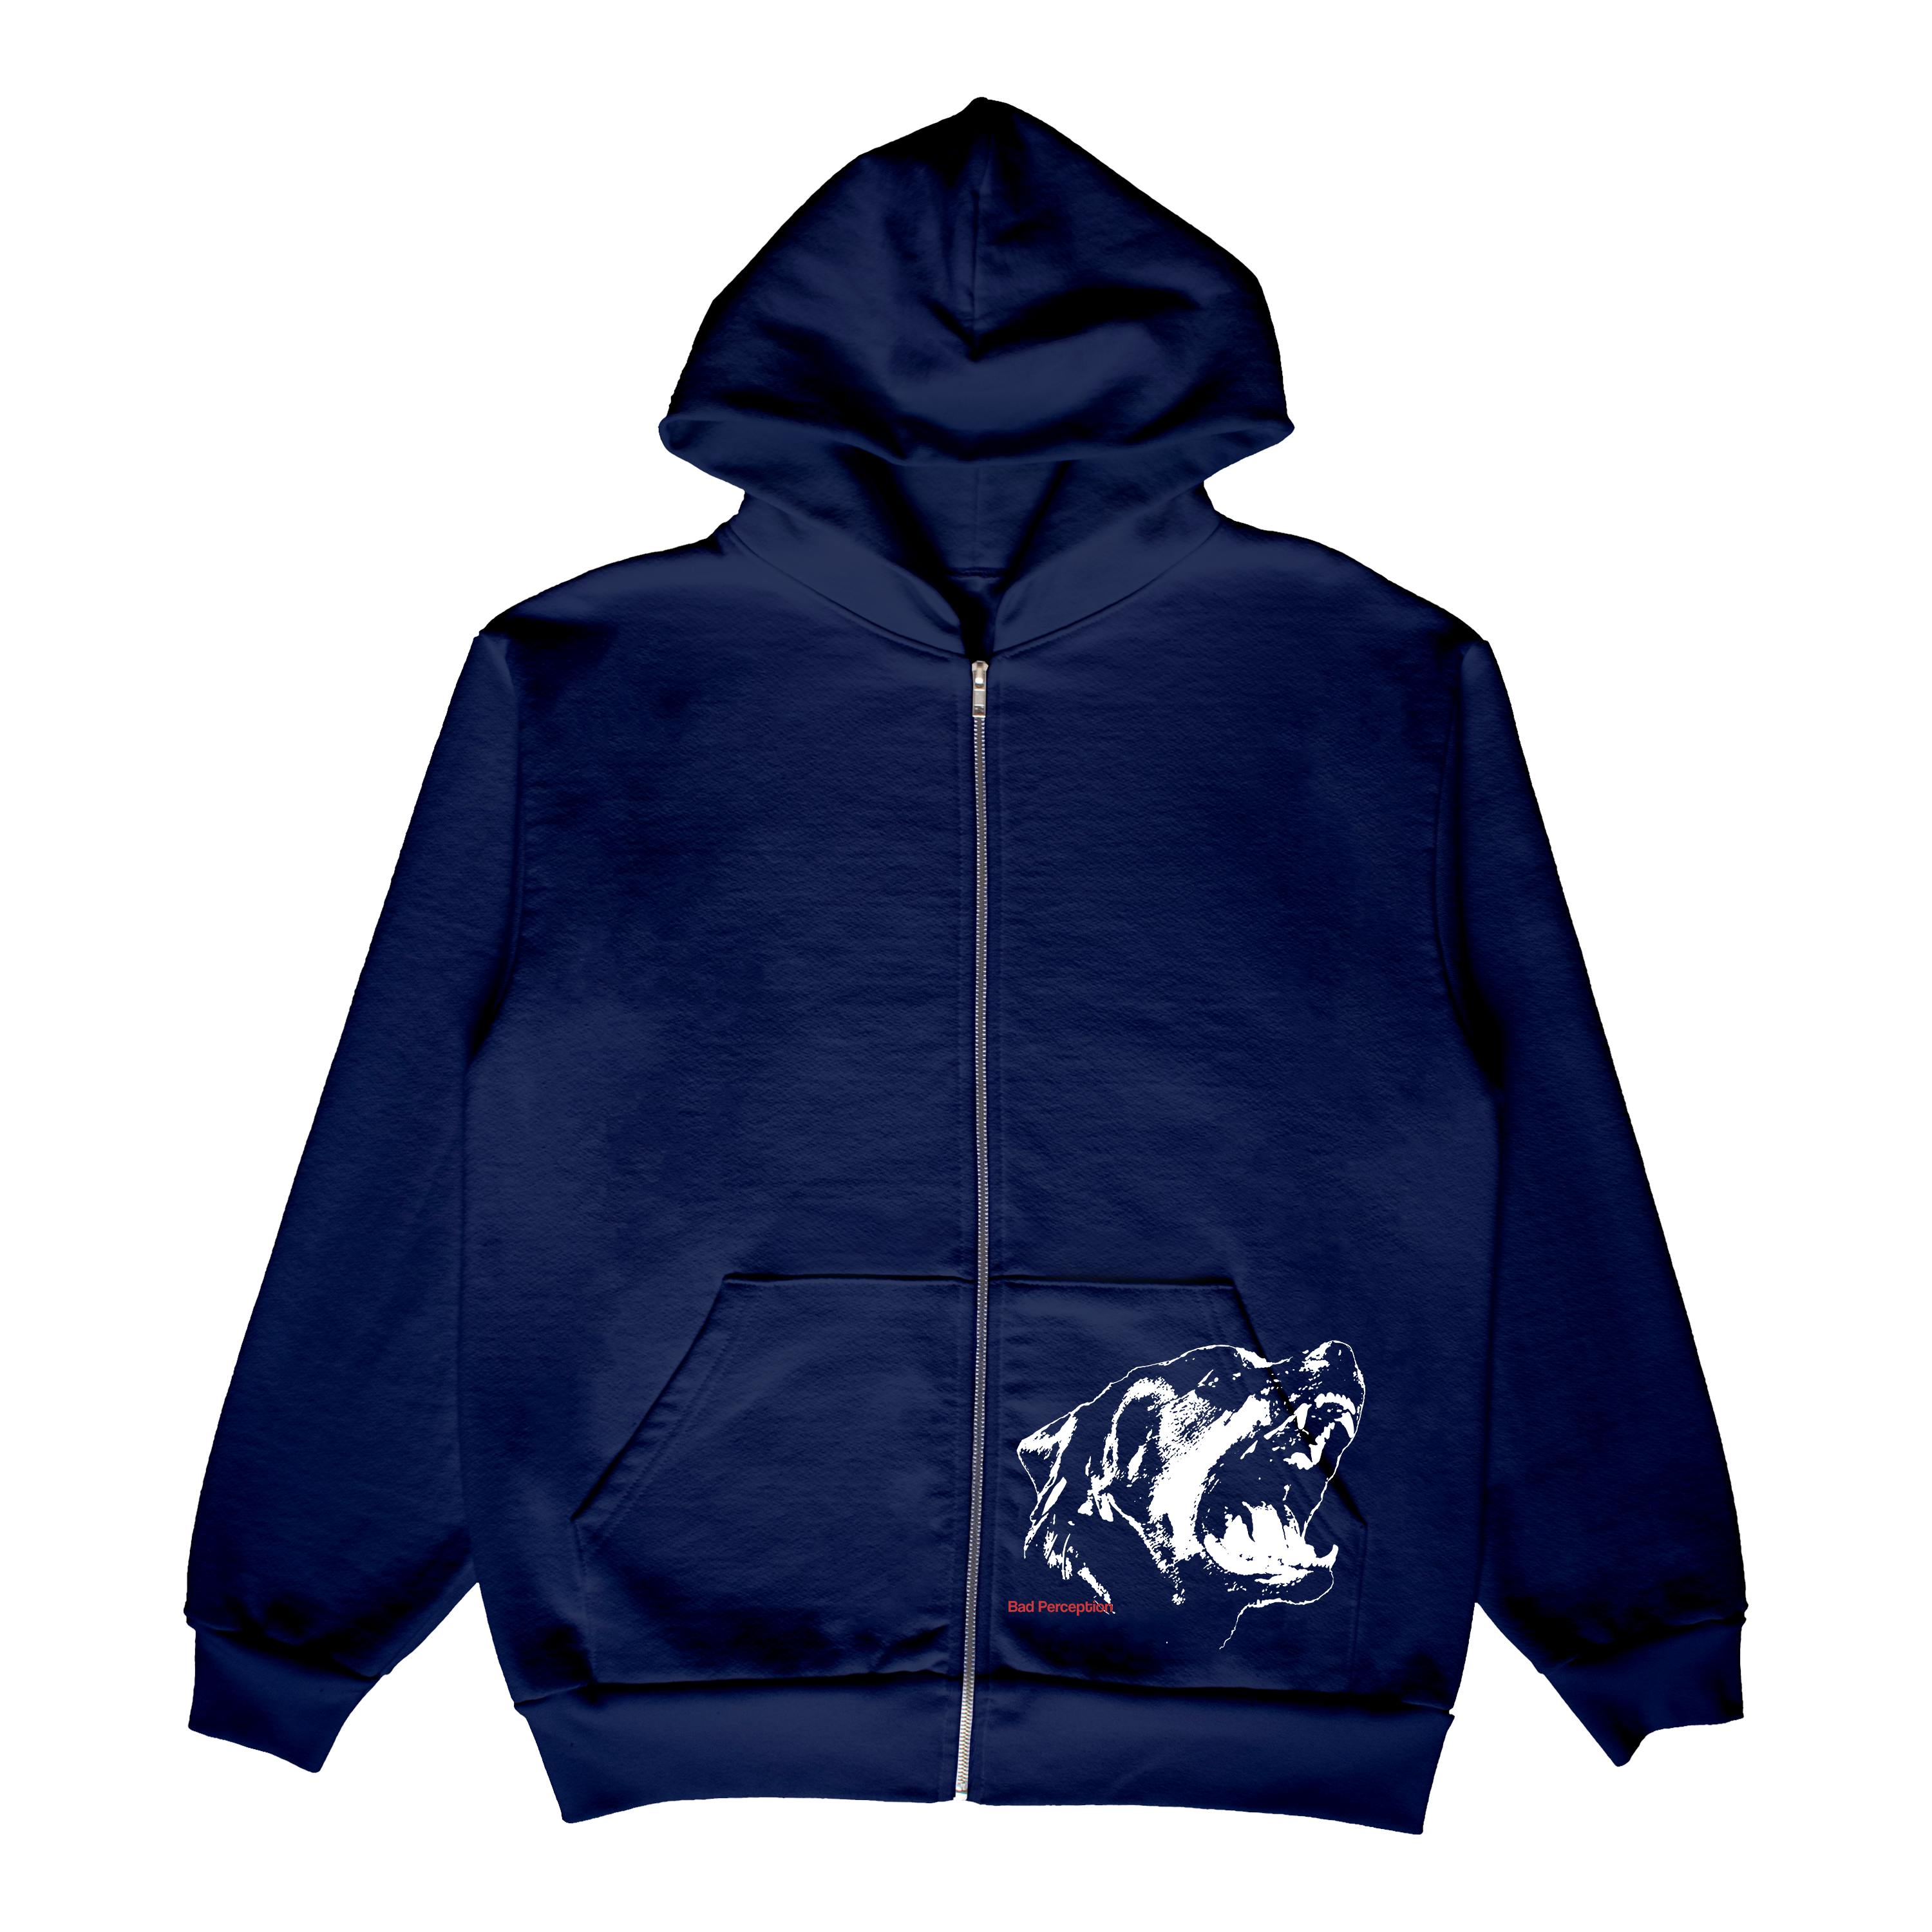 I LUV THIS DAWG ZIP UP